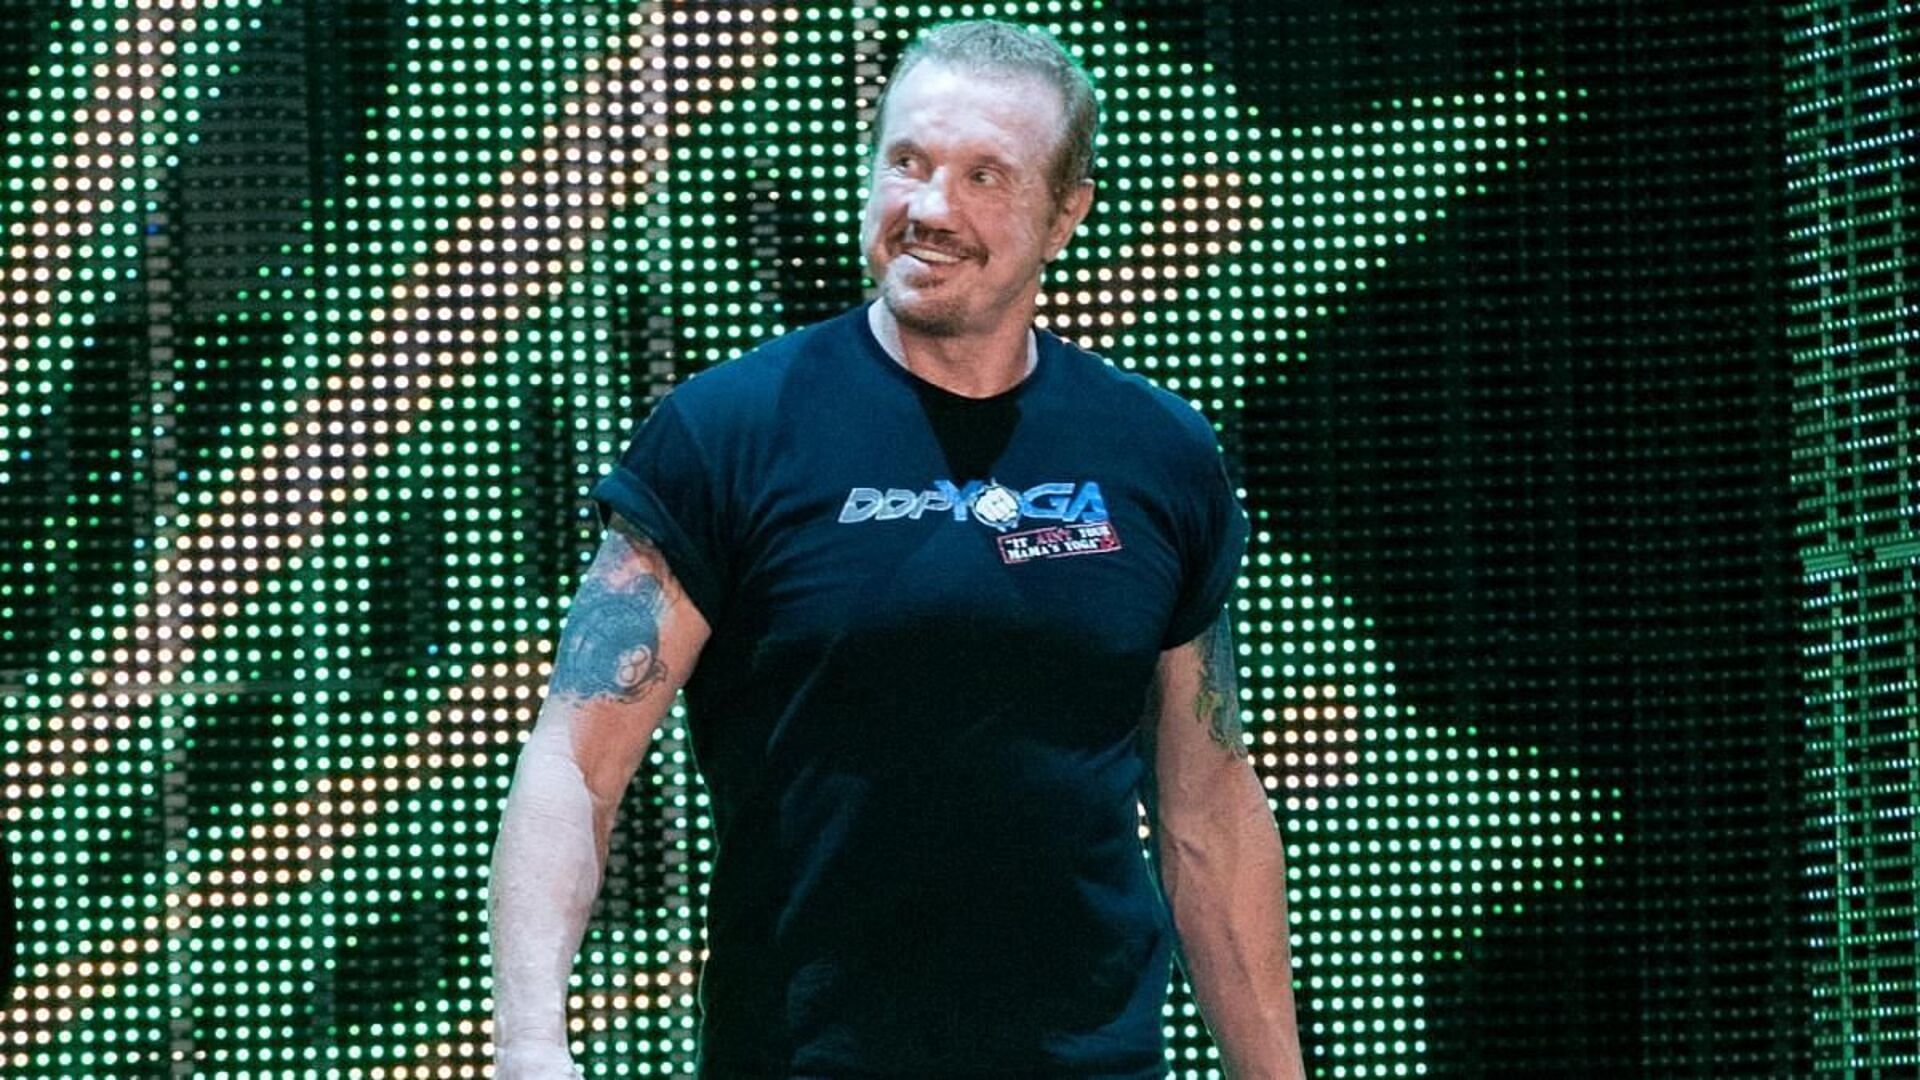 WWE Hall of Famer DDP partners with IMPACT Wrestling